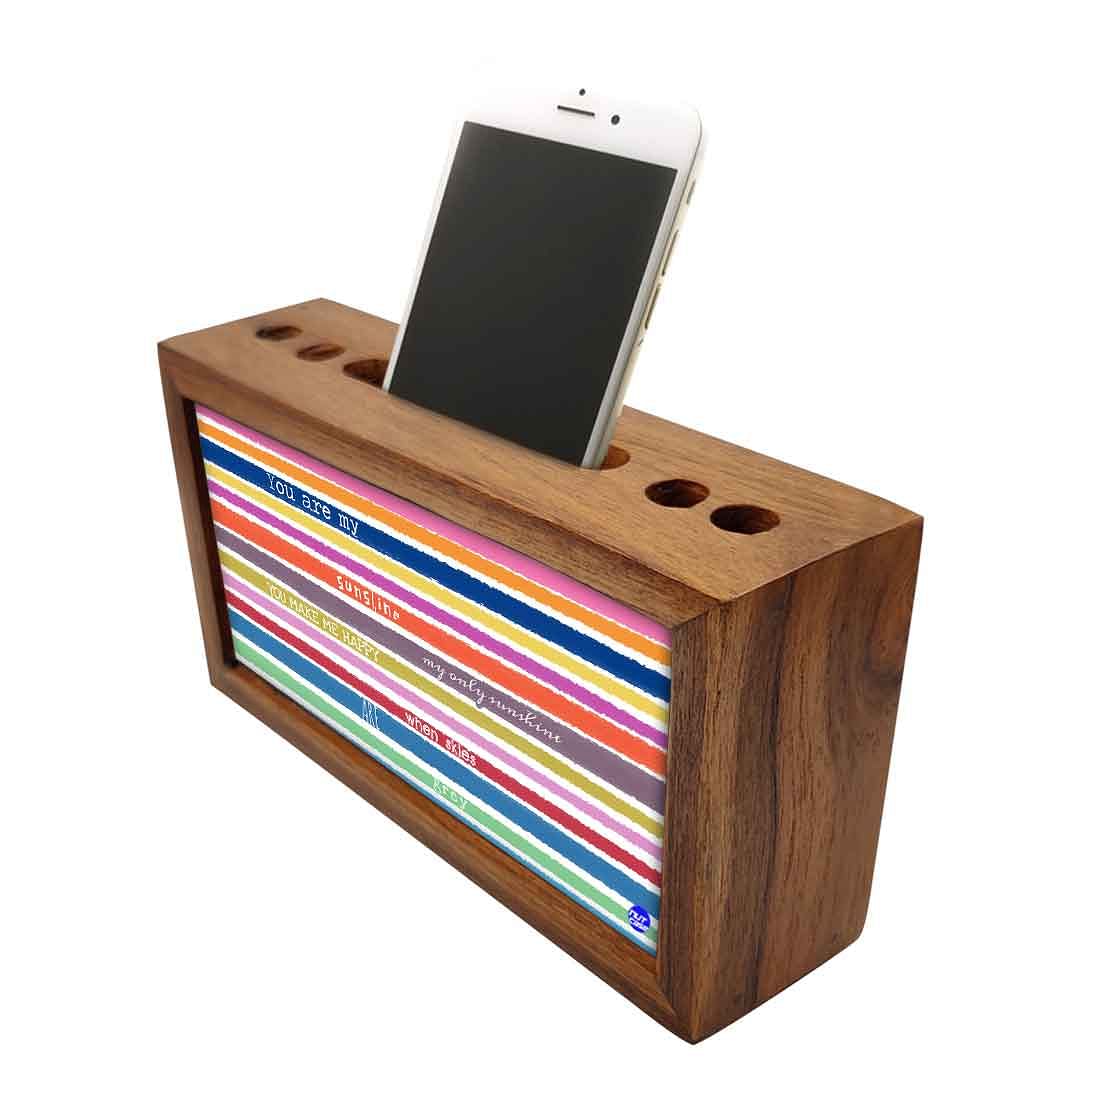 Wooden Pen Stand for Office - You Are My Sunshine Nutcase